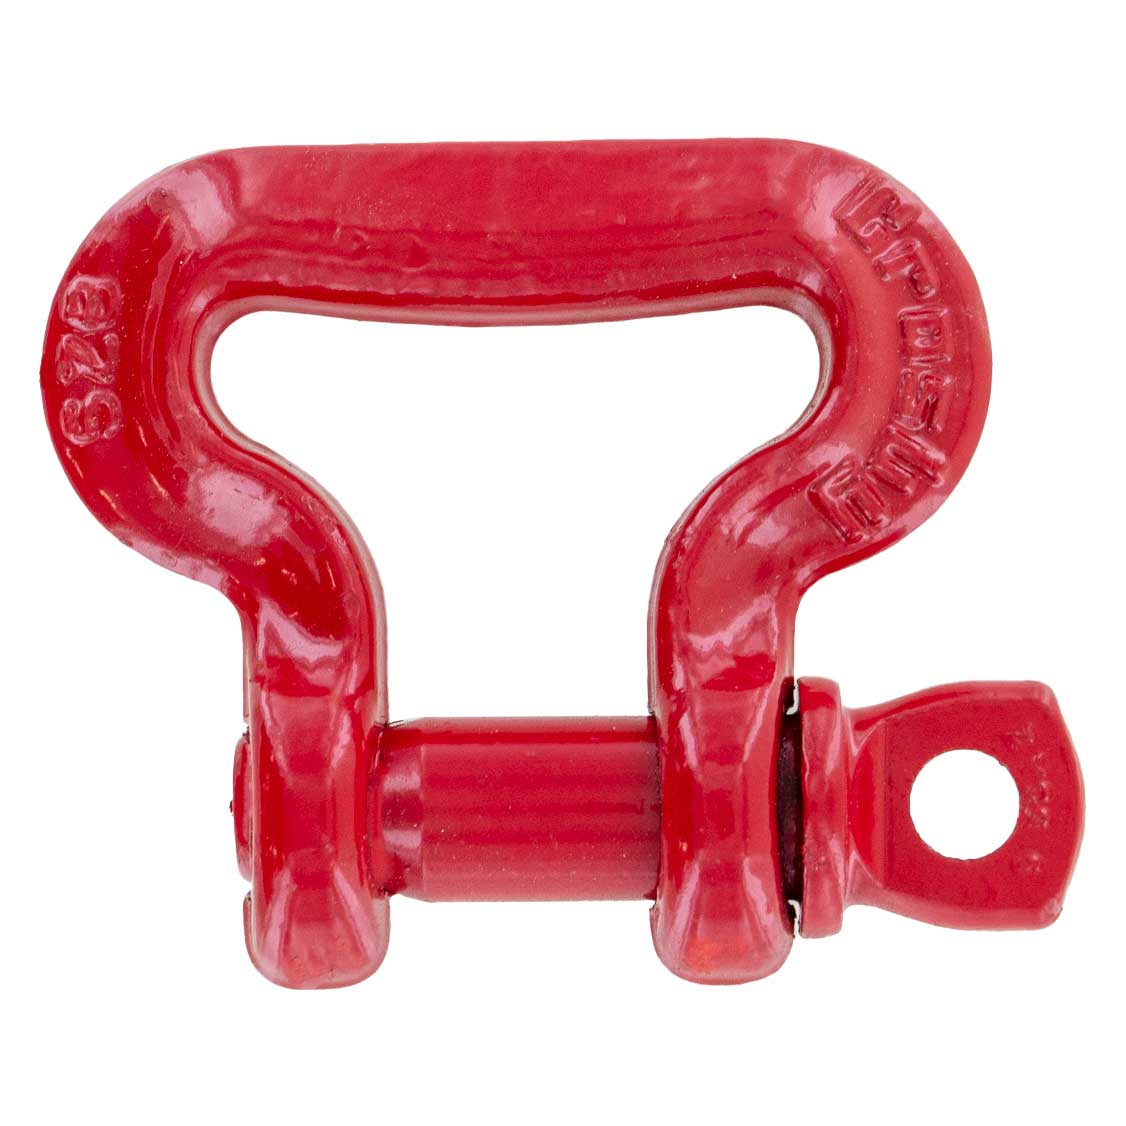 Crosby® Screw Pin Sling Saver Shackle | S-281 - 6.25 Ton primary image